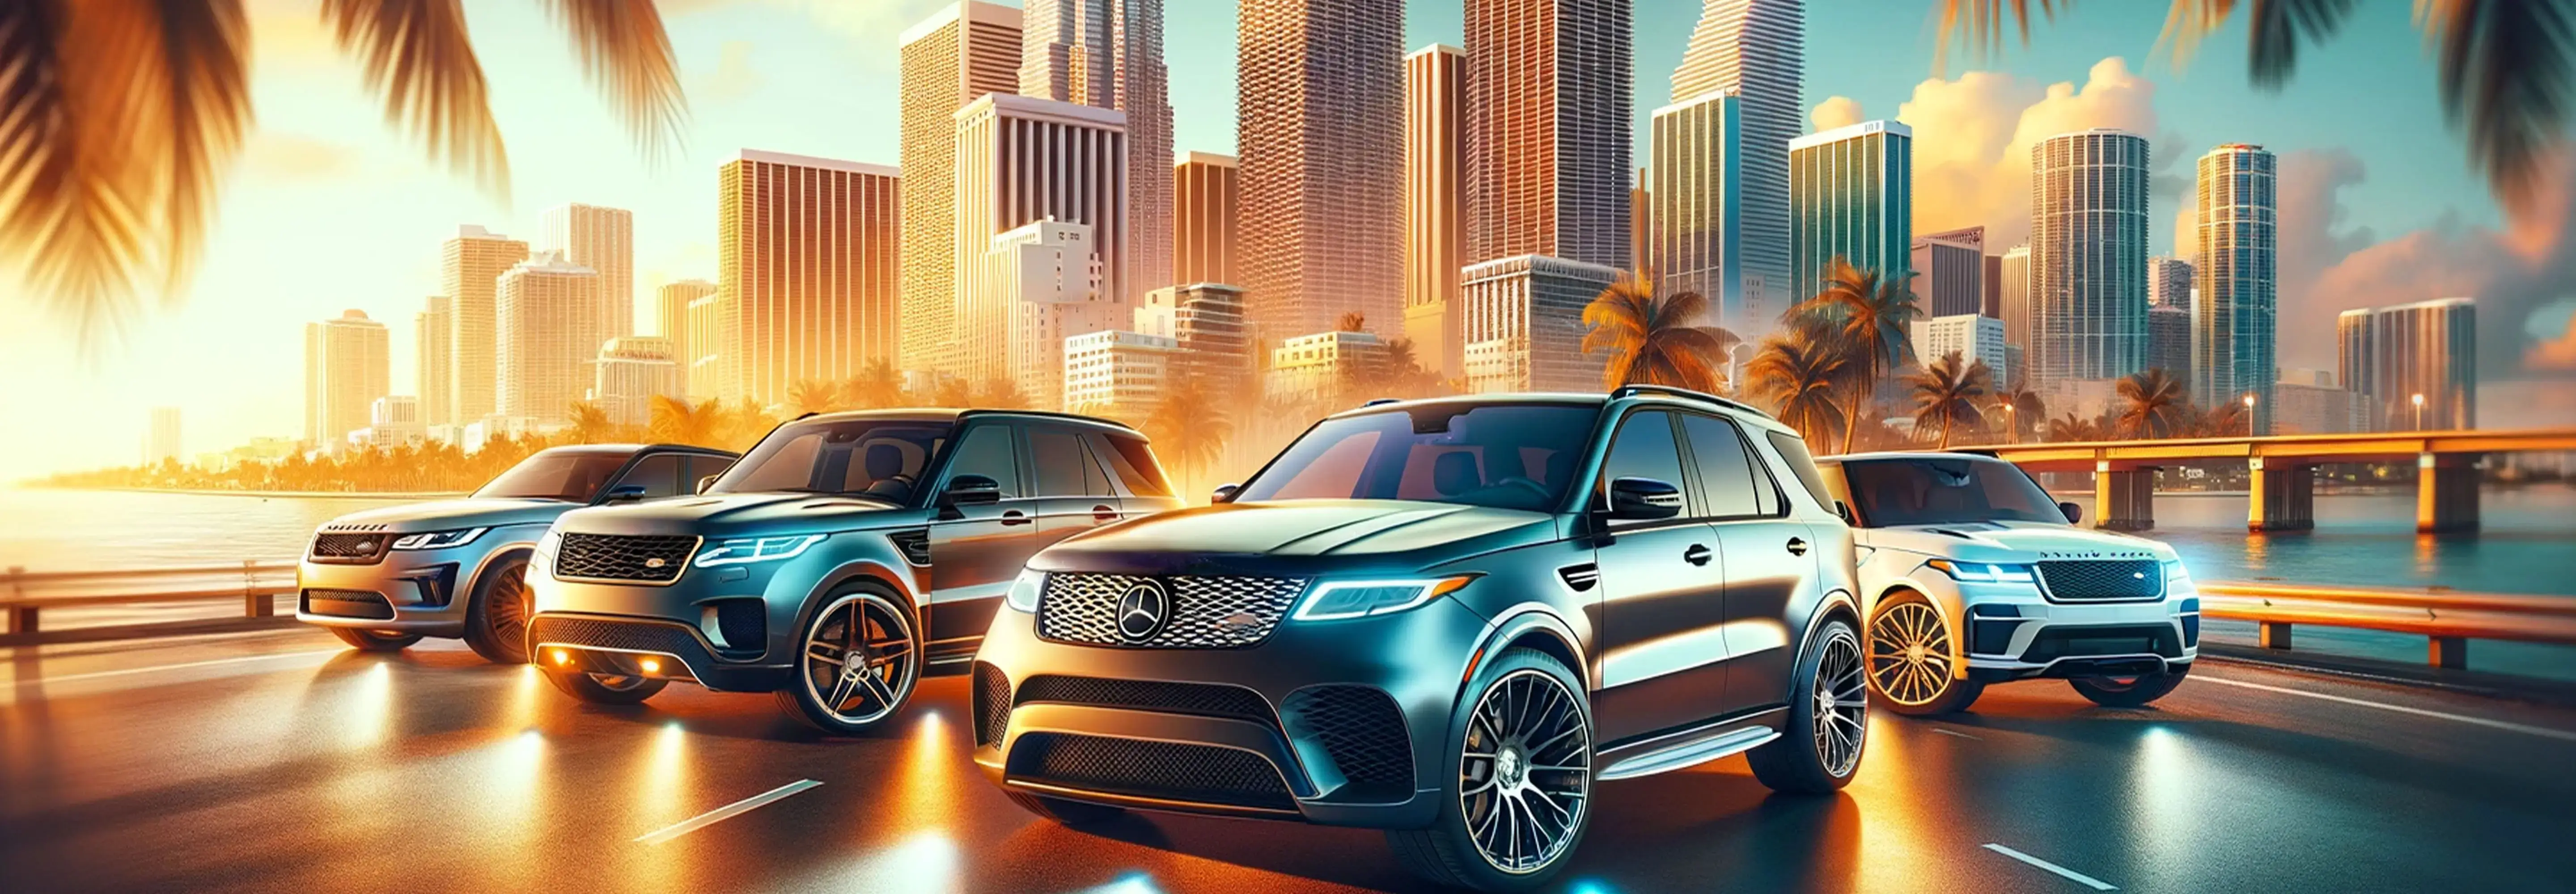 image of Suvs with miami background